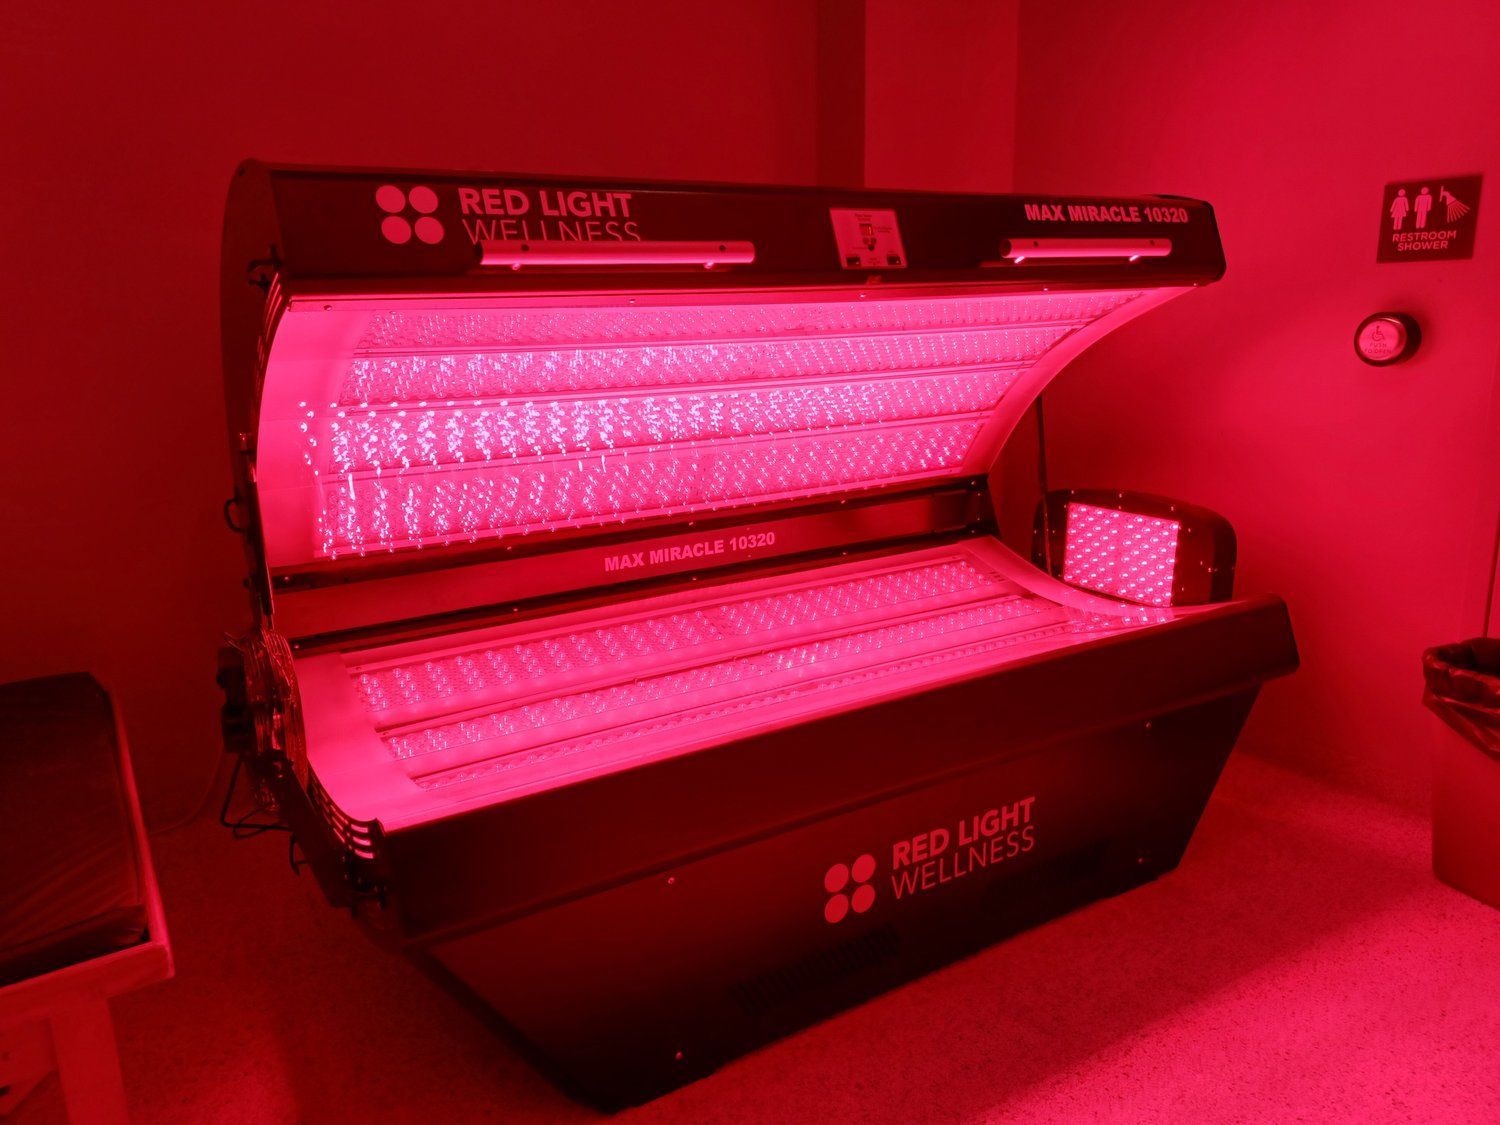 A Max Miracle 9600 red light therapy bed lit up